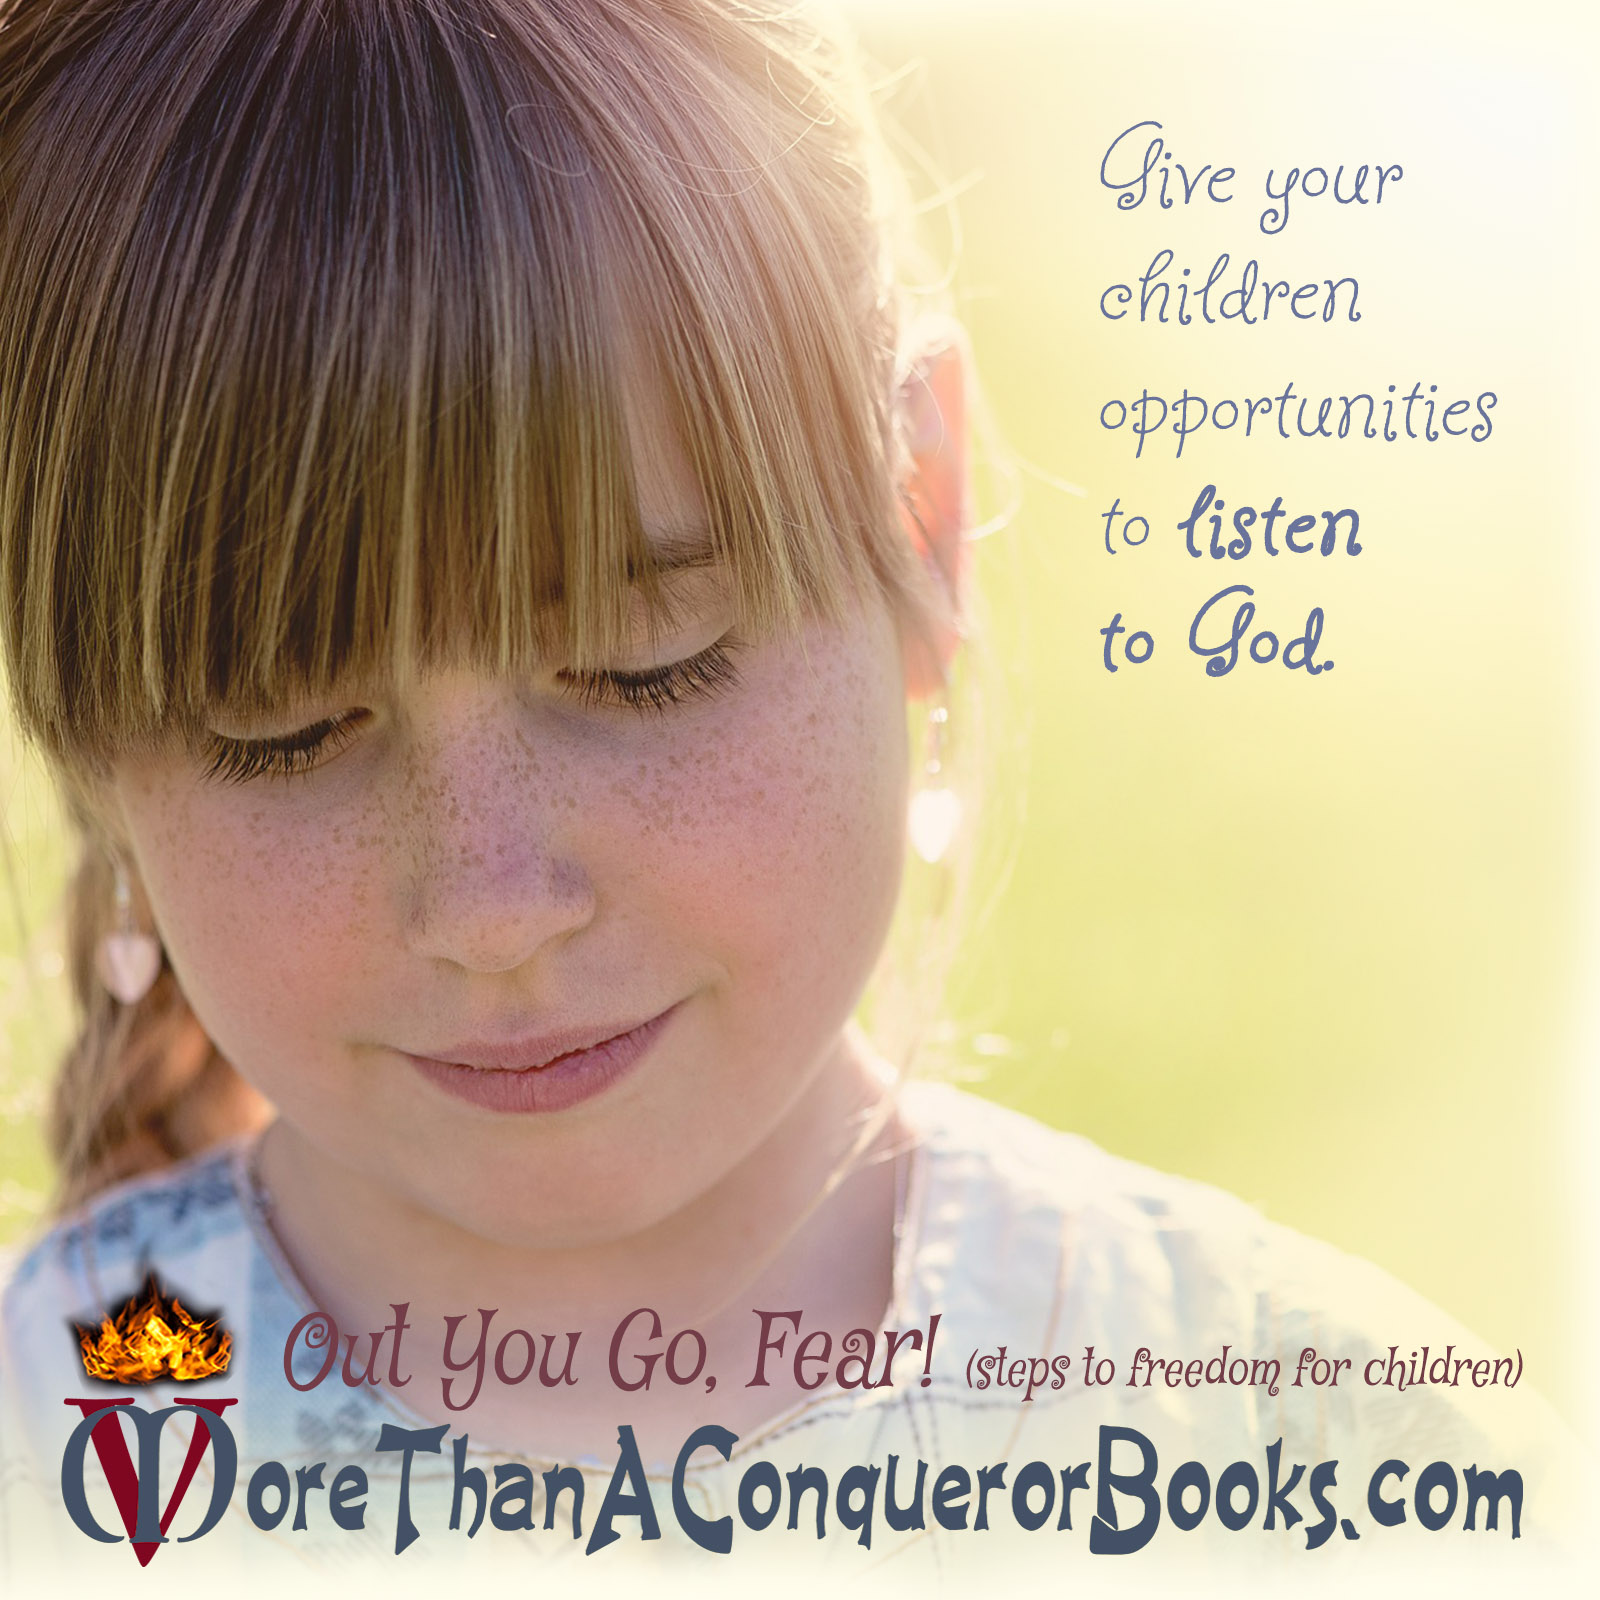 Give your child opportunities to listen to God-Out You Go Fear-Mikaela Vincent-MoreThanAConquerorBooks